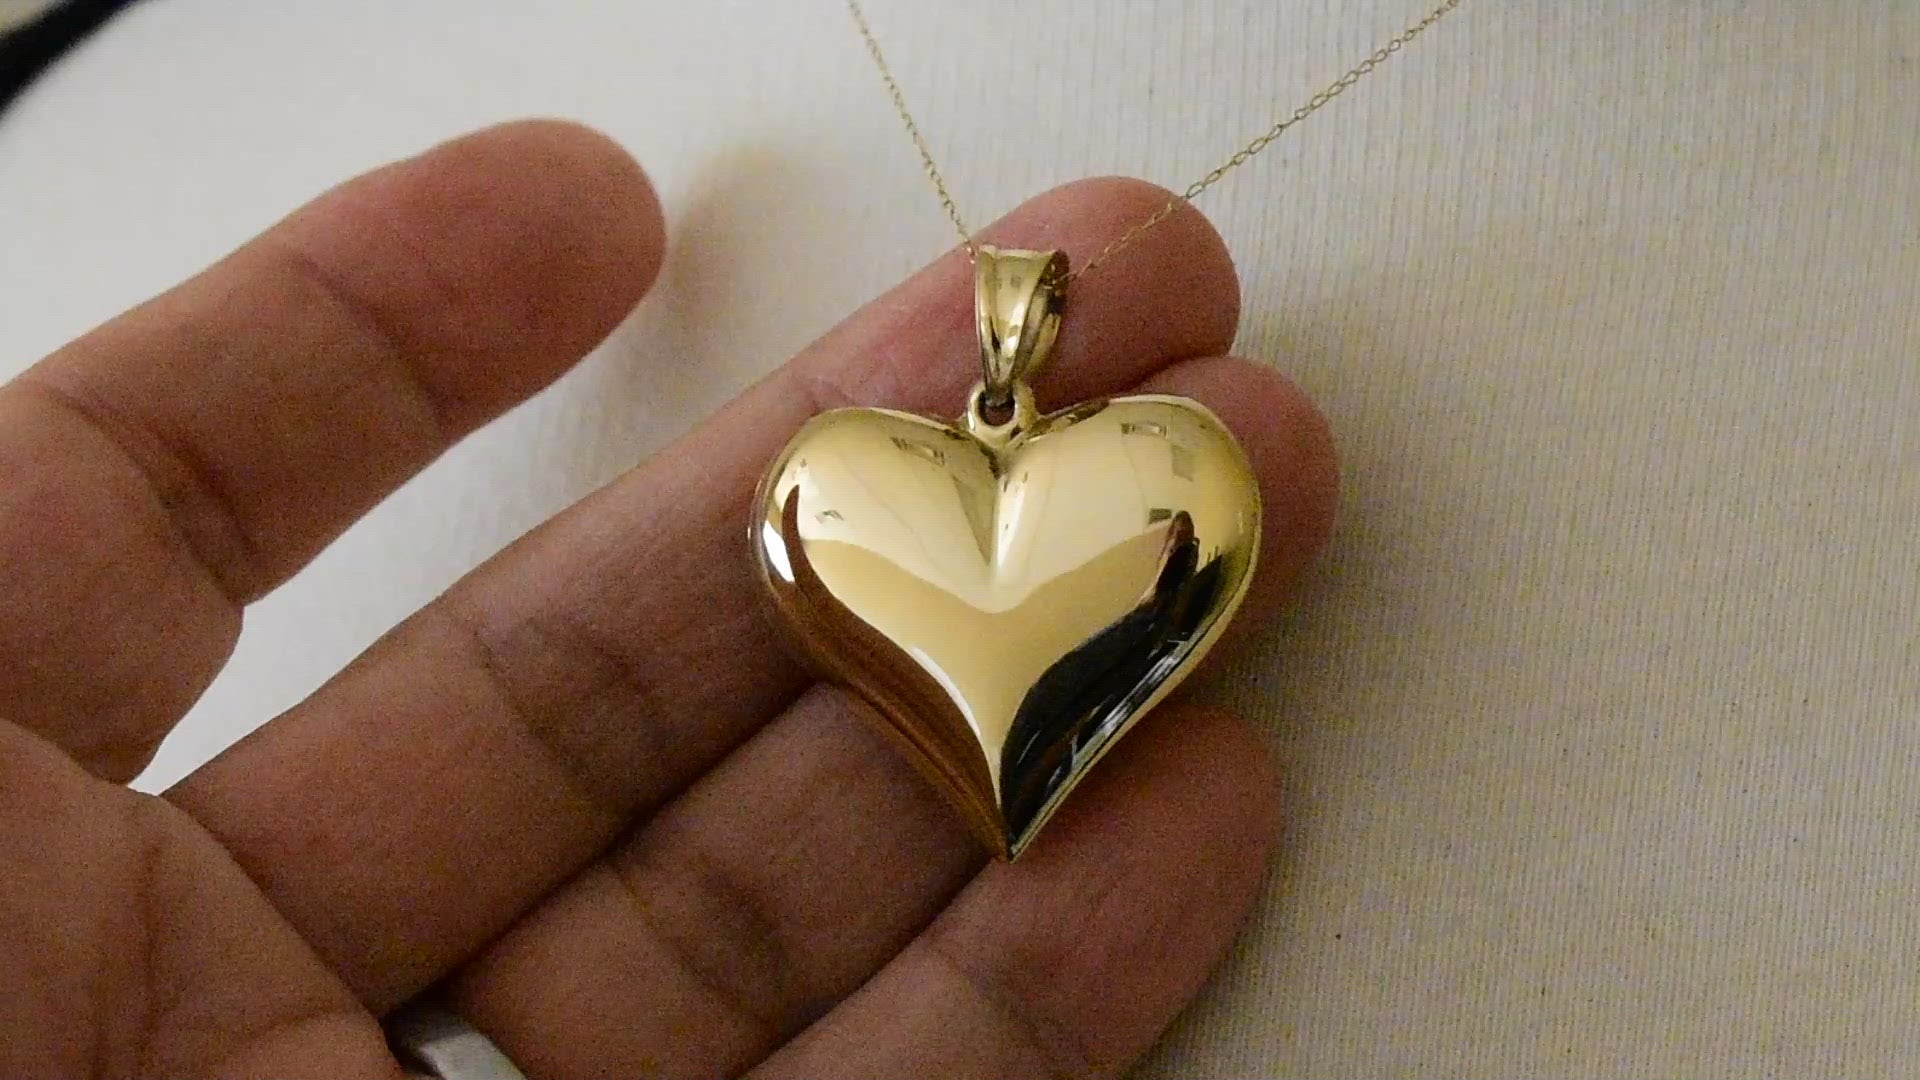 14k Yellow Gold Large Puffed Heart Hollow 3D Pendant Charm